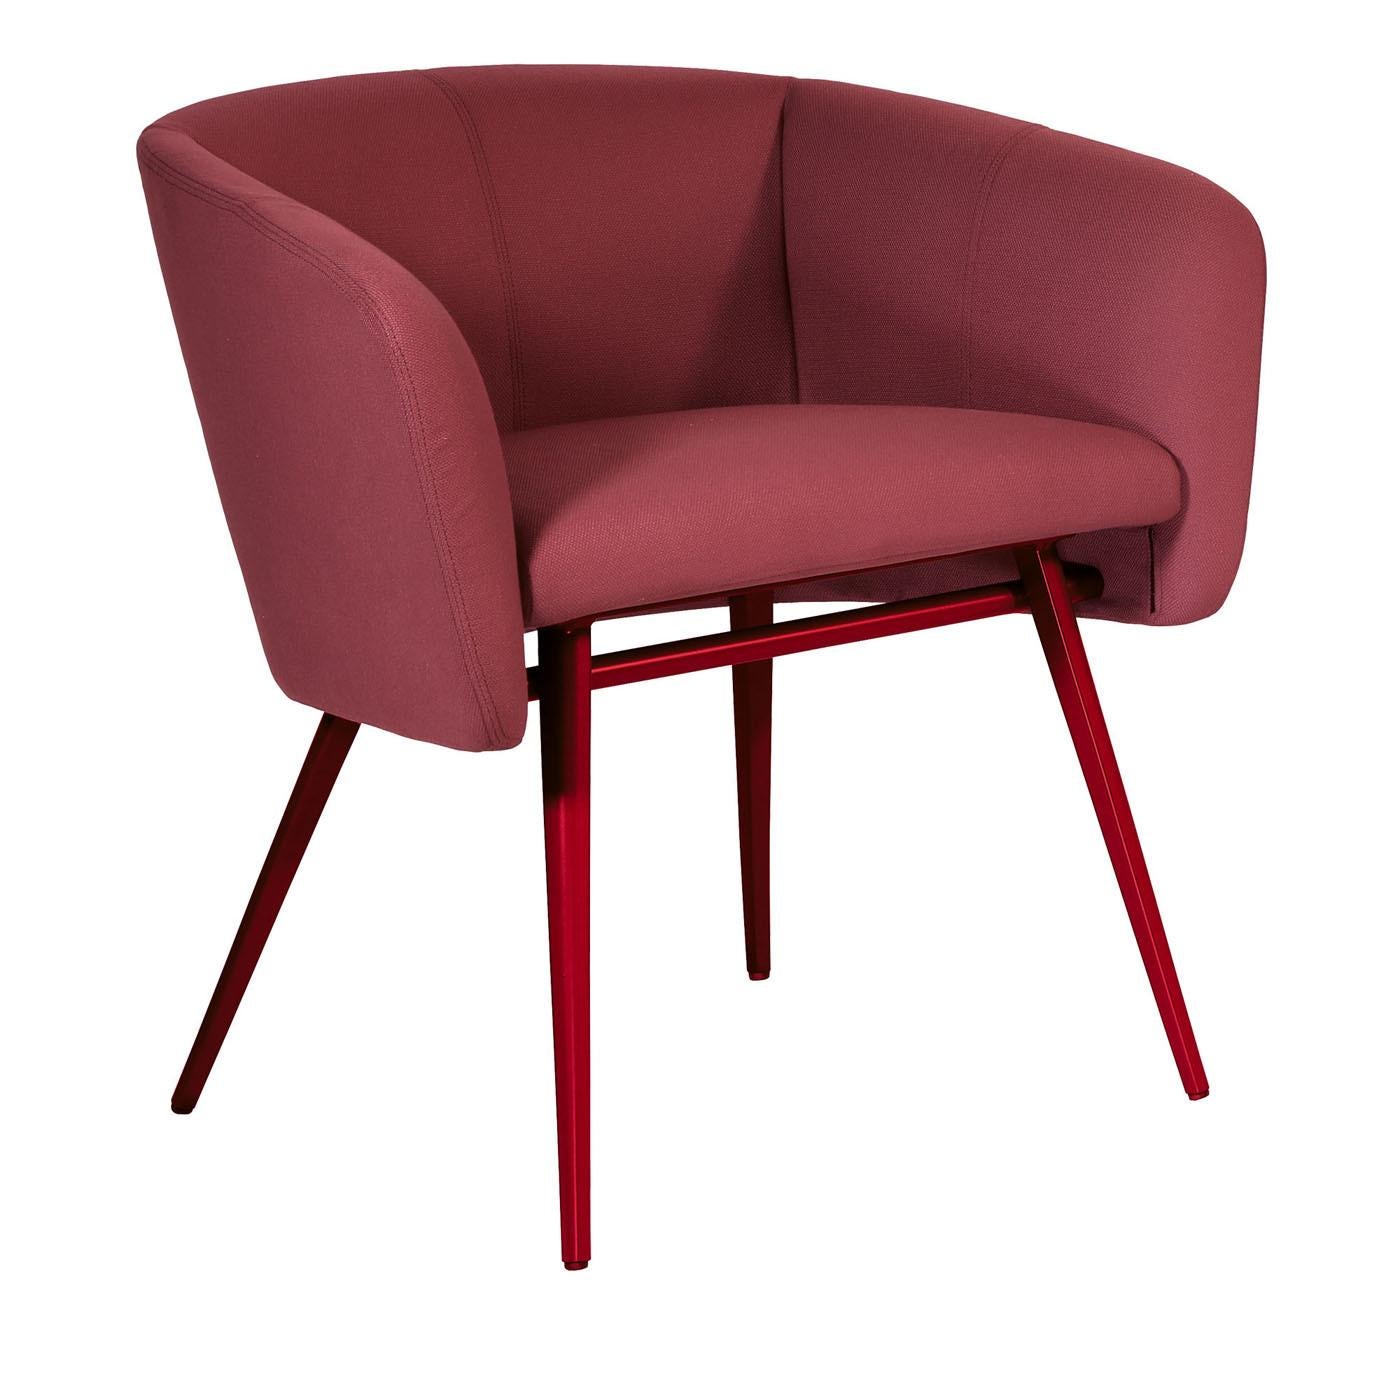 Balù Met Burgundy Chair By Emilio Nanni In New Condition For Sale In Milan, IT